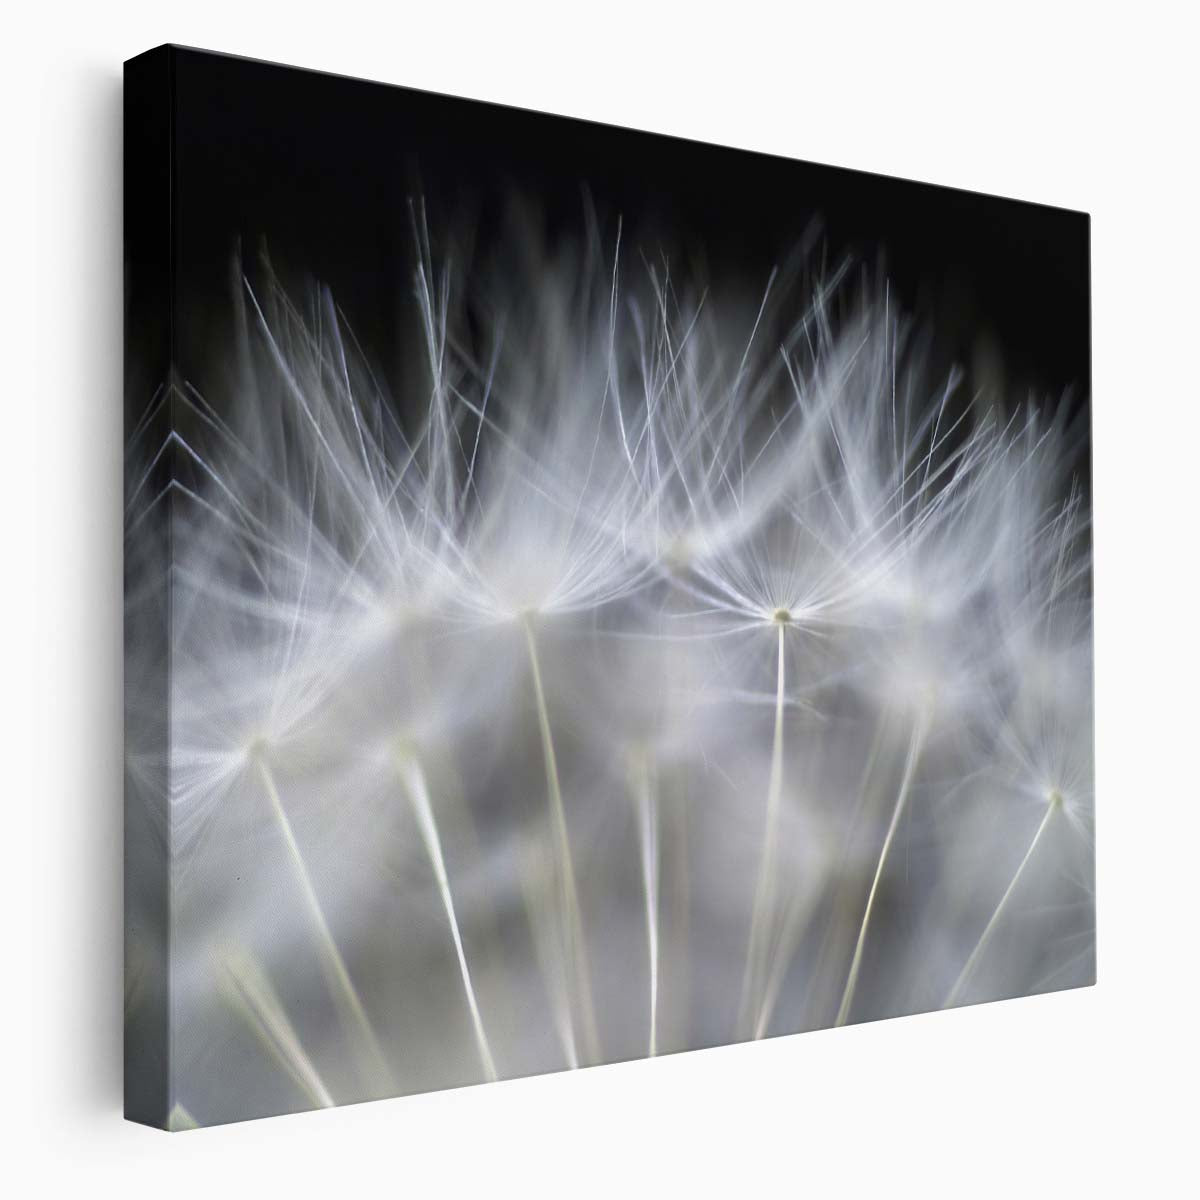 Delicate Dandelion Feather Macro Floral Wall Art by Luxuriance Designs. Made in USA.